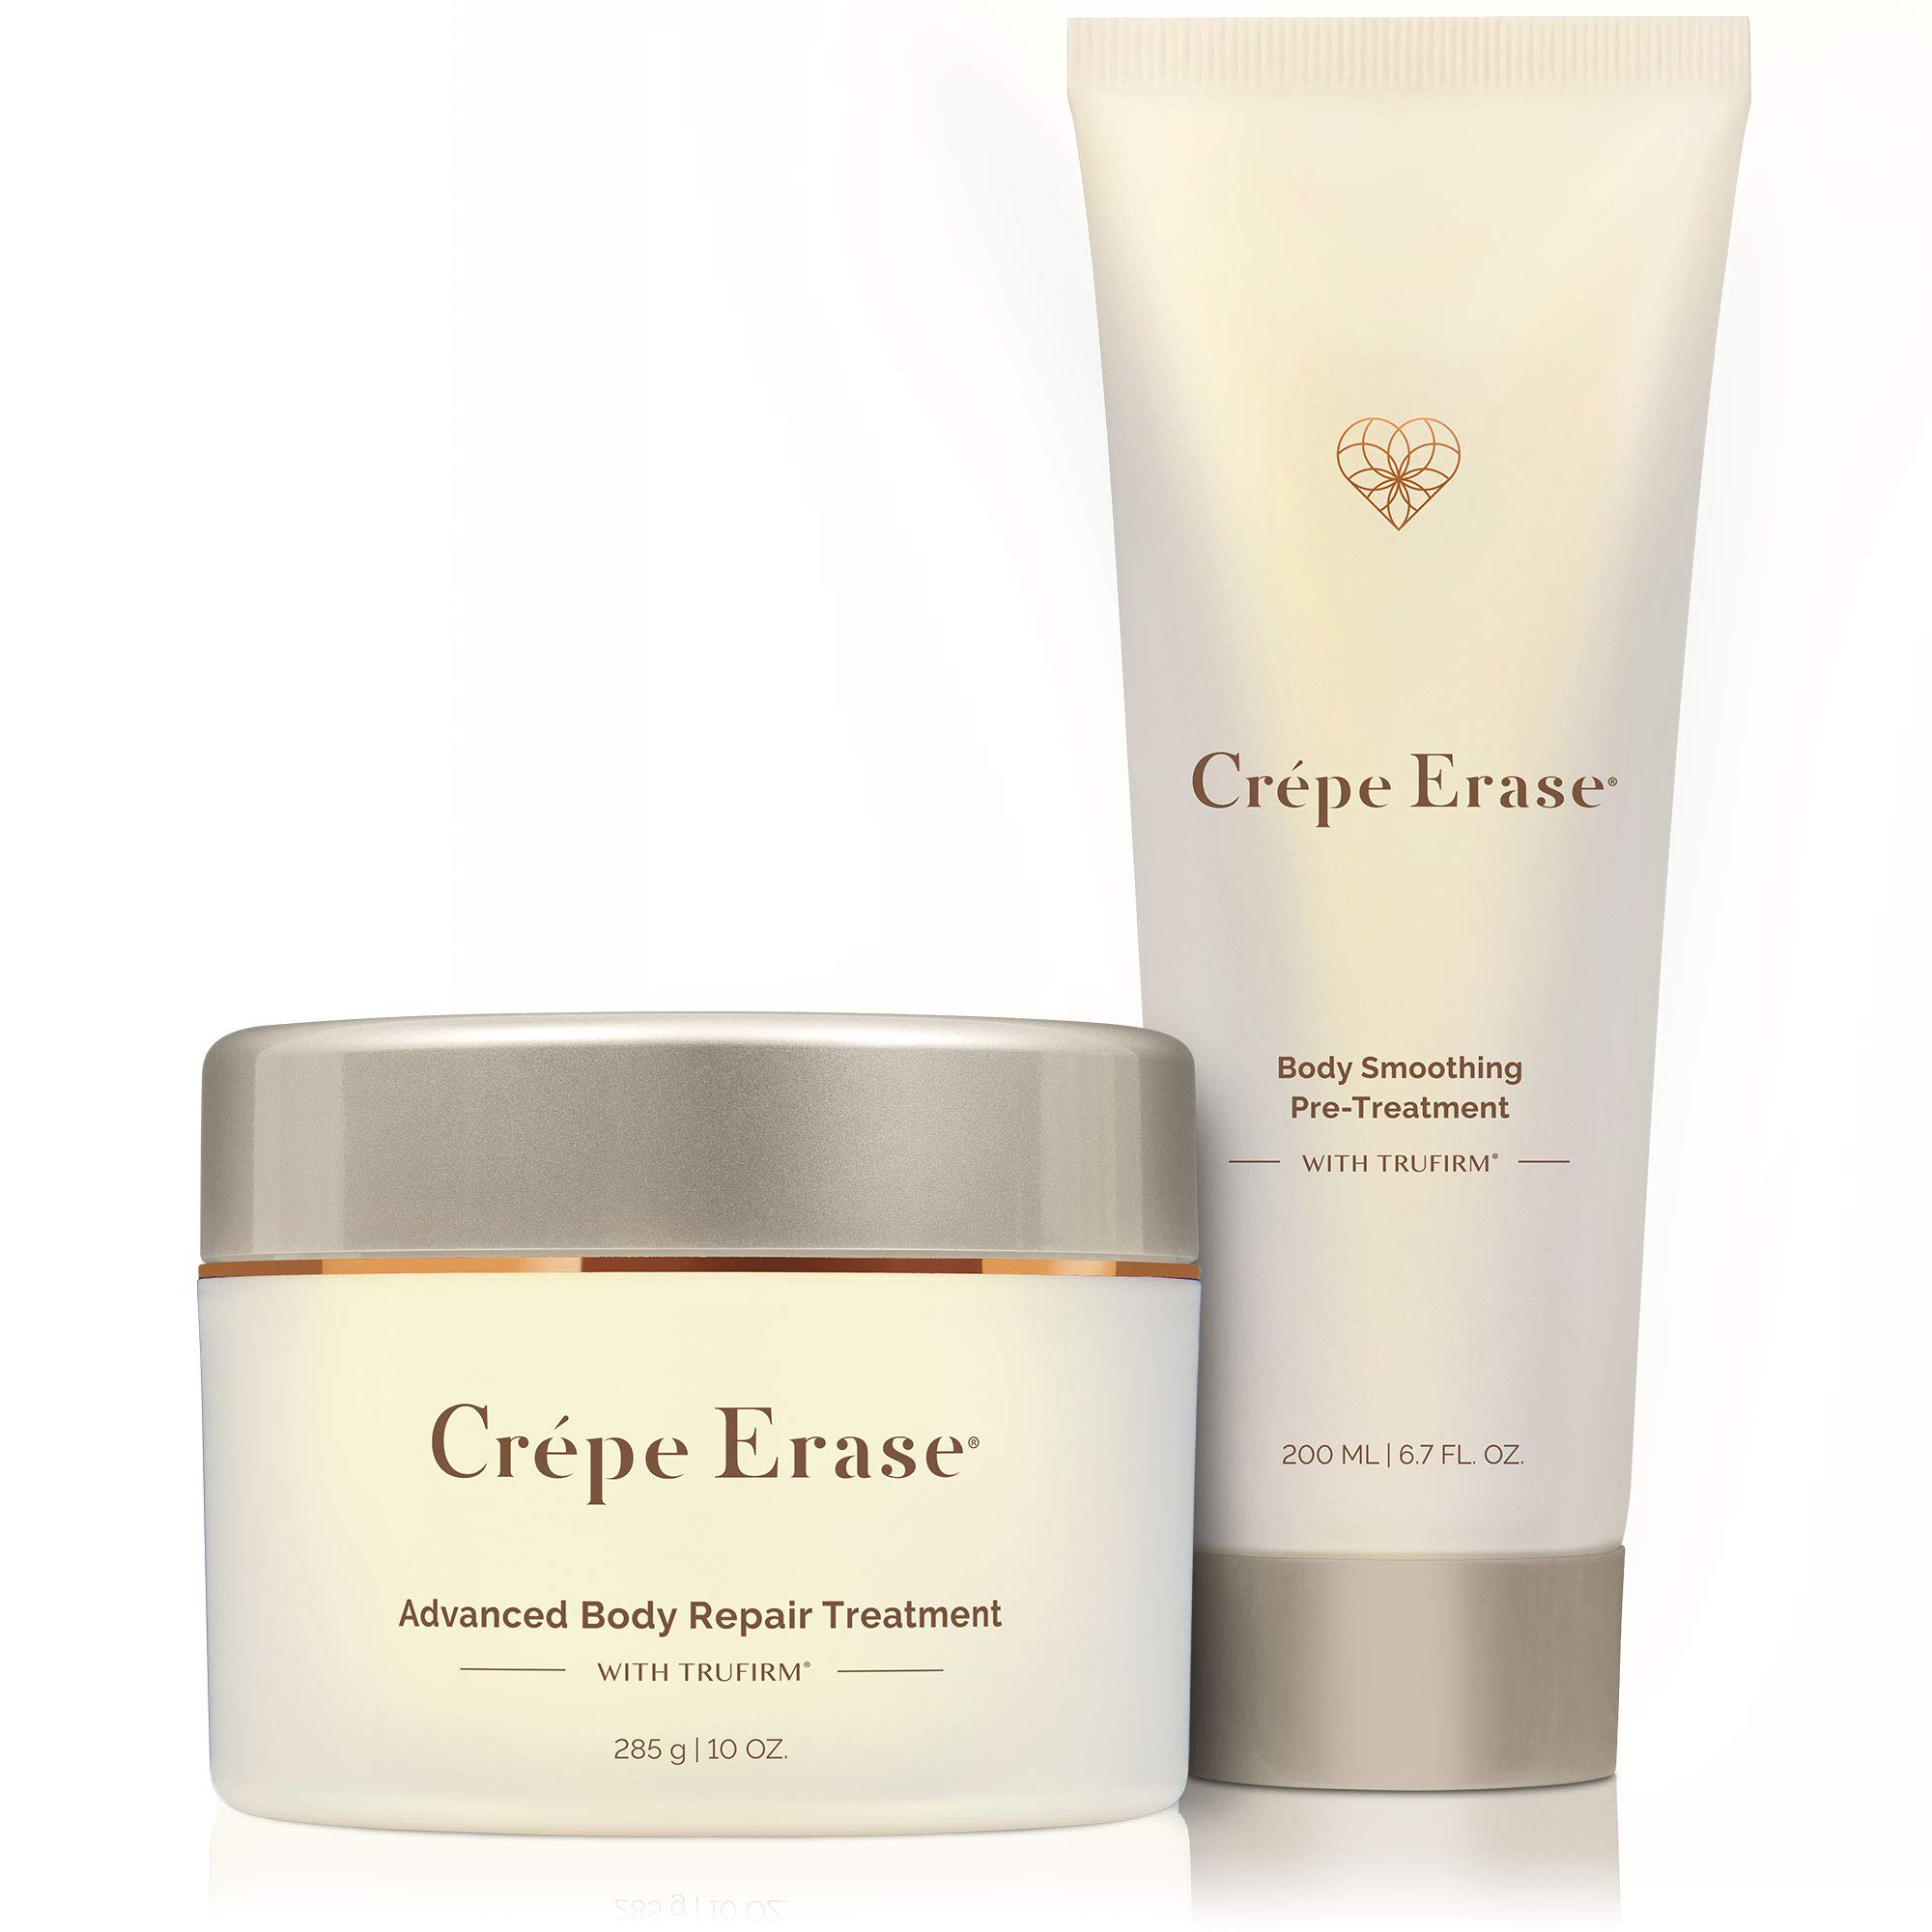 Crepe Erase Review - The Dermatology Review